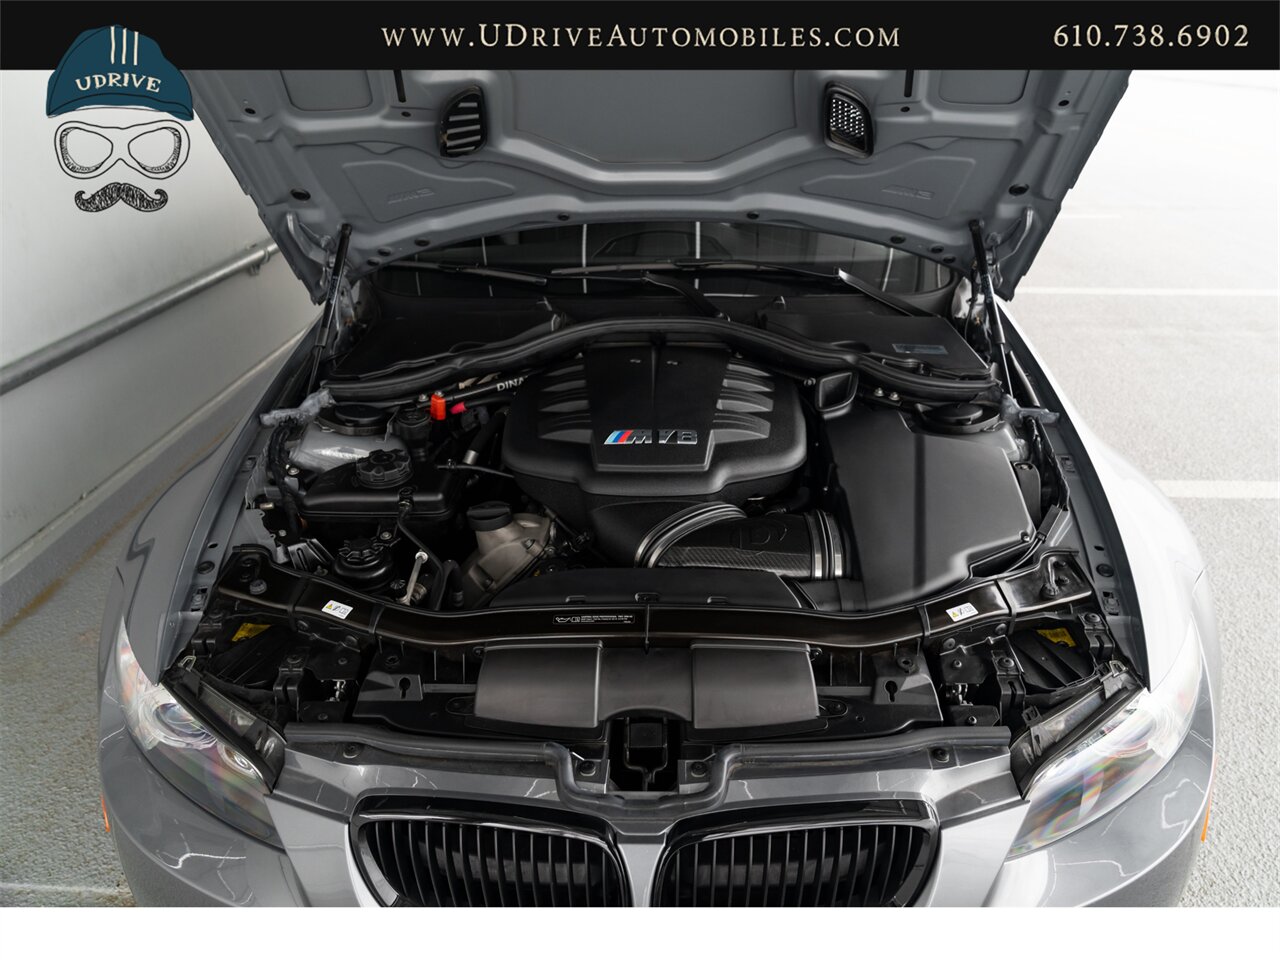 2012 BMW M3 E92 6 Speed 7k Miles Dinan Upgrades  GTS/359 Wheels Carbon Fiber Roof - Photo 48 - West Chester, PA 19382